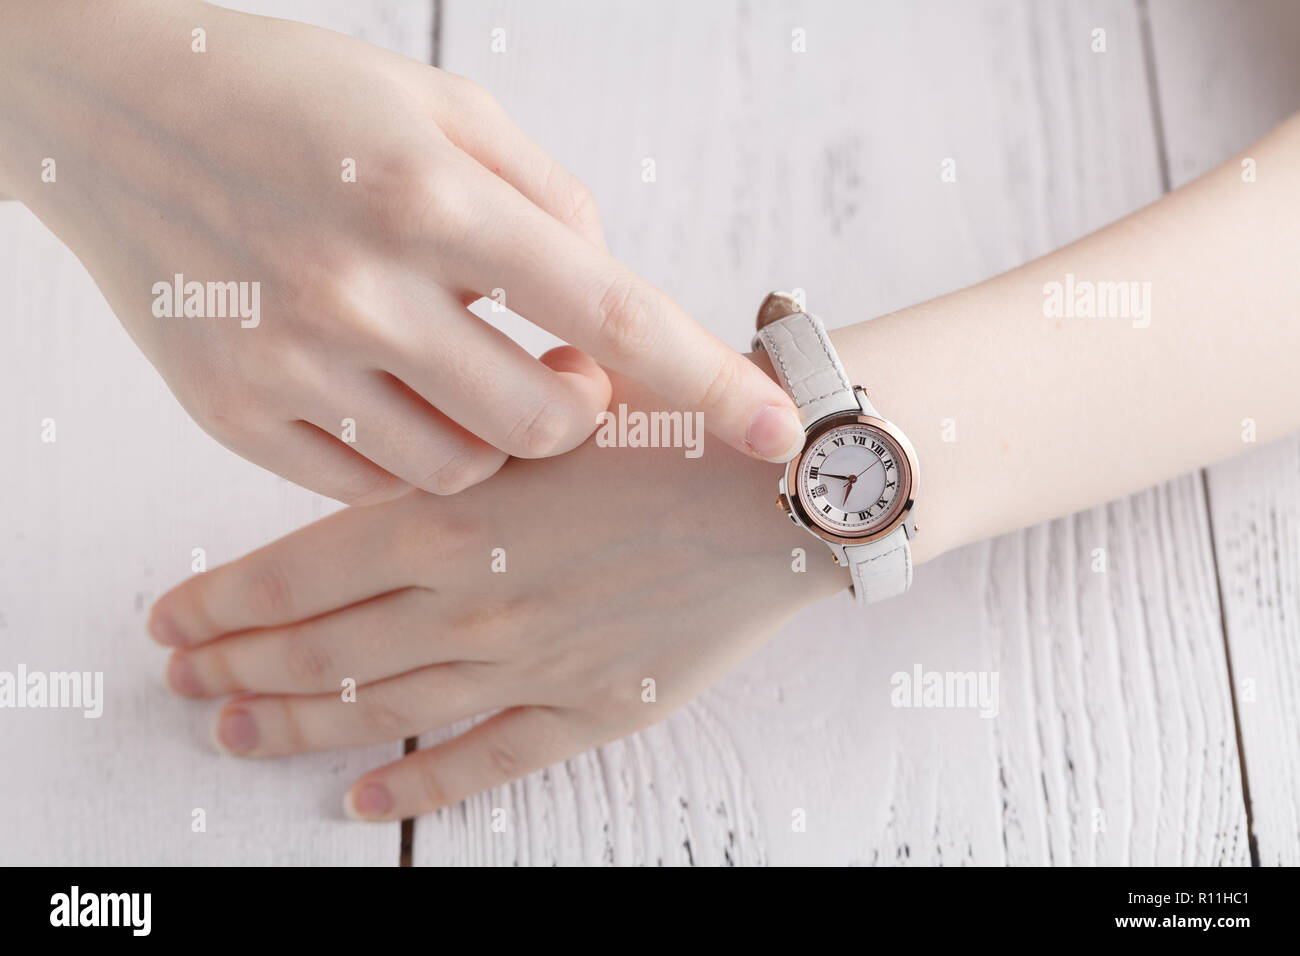 Checking time, female wrist watch on hand Stock Photo